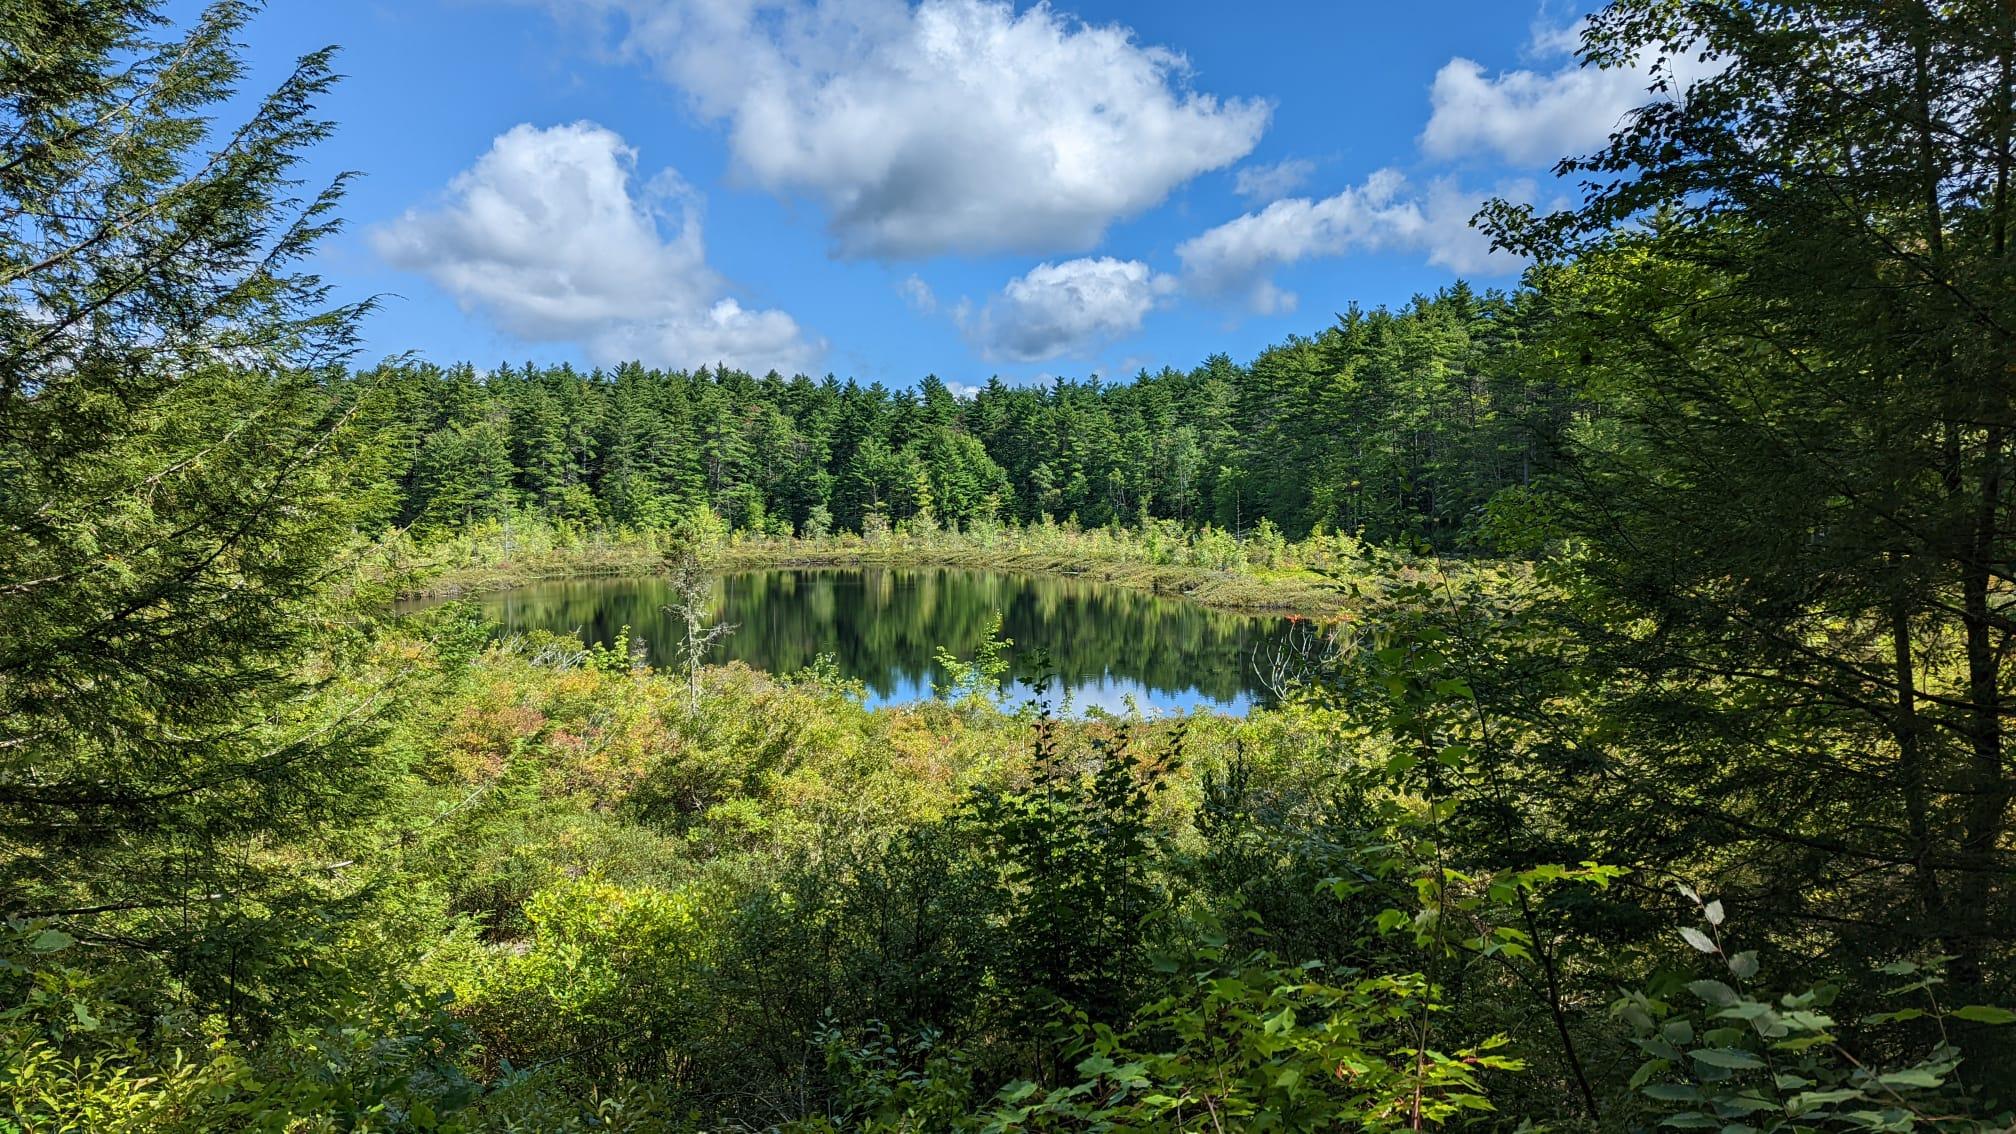 A small blue lake surrounded by green trees